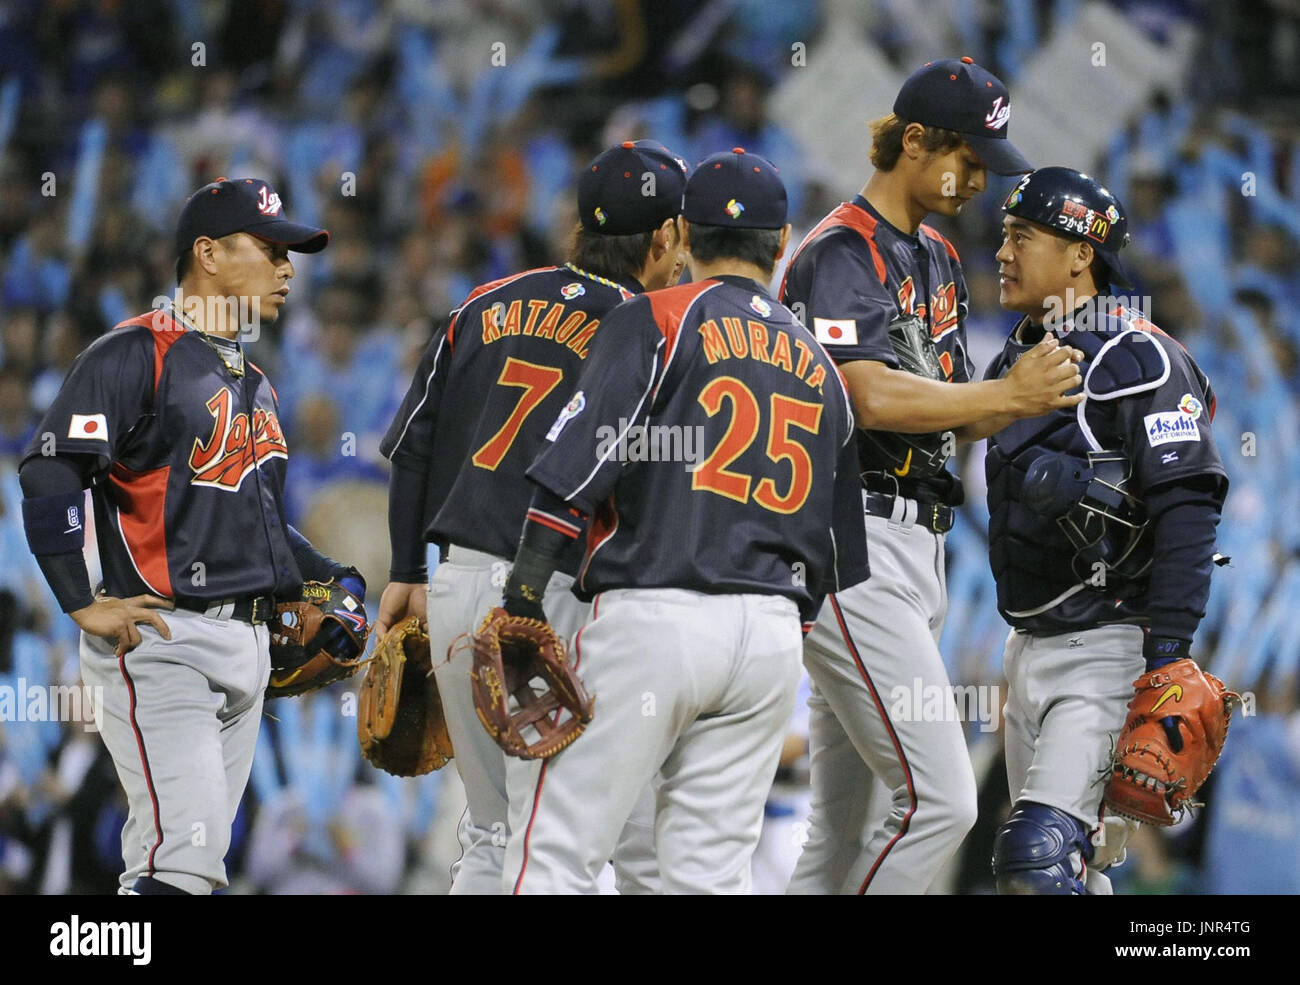 SAN DIEGO, United States - Japan players gather at the pitching mound after pitcher Yu Darvish (2nd from R) allowed a run for South Korea in the first inning of their game in the World Baseball Classic second round at PETCO Park in San Diego, California, on March 17. (Kyodo) Stock Photo